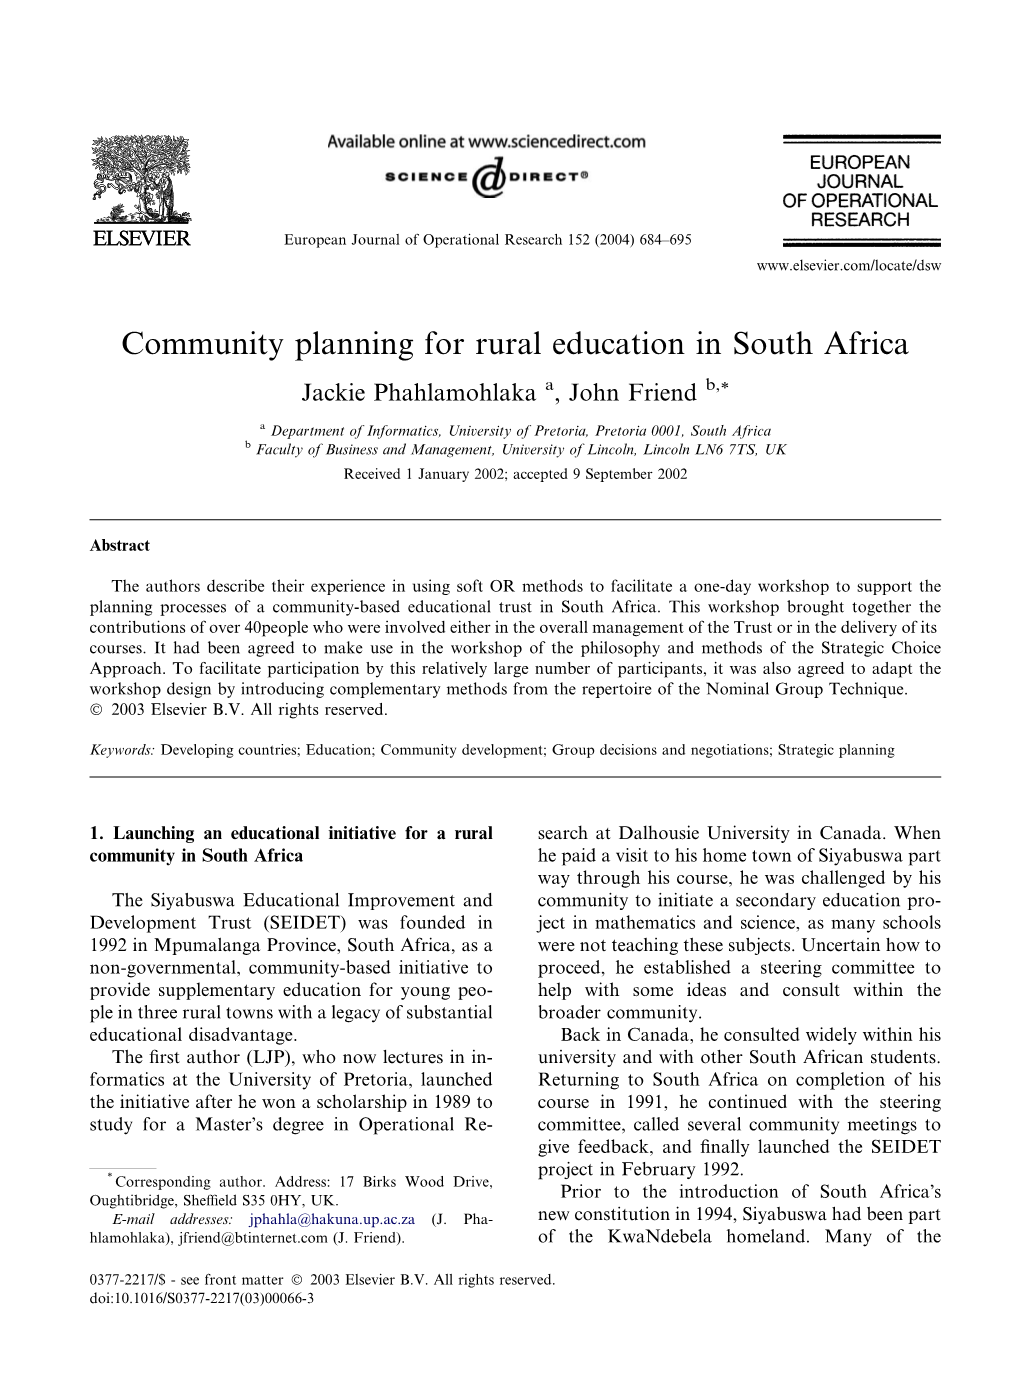 Community Planning for Rural Education in South Africa Jackie Phahlamohlaka A, John Friend B,*